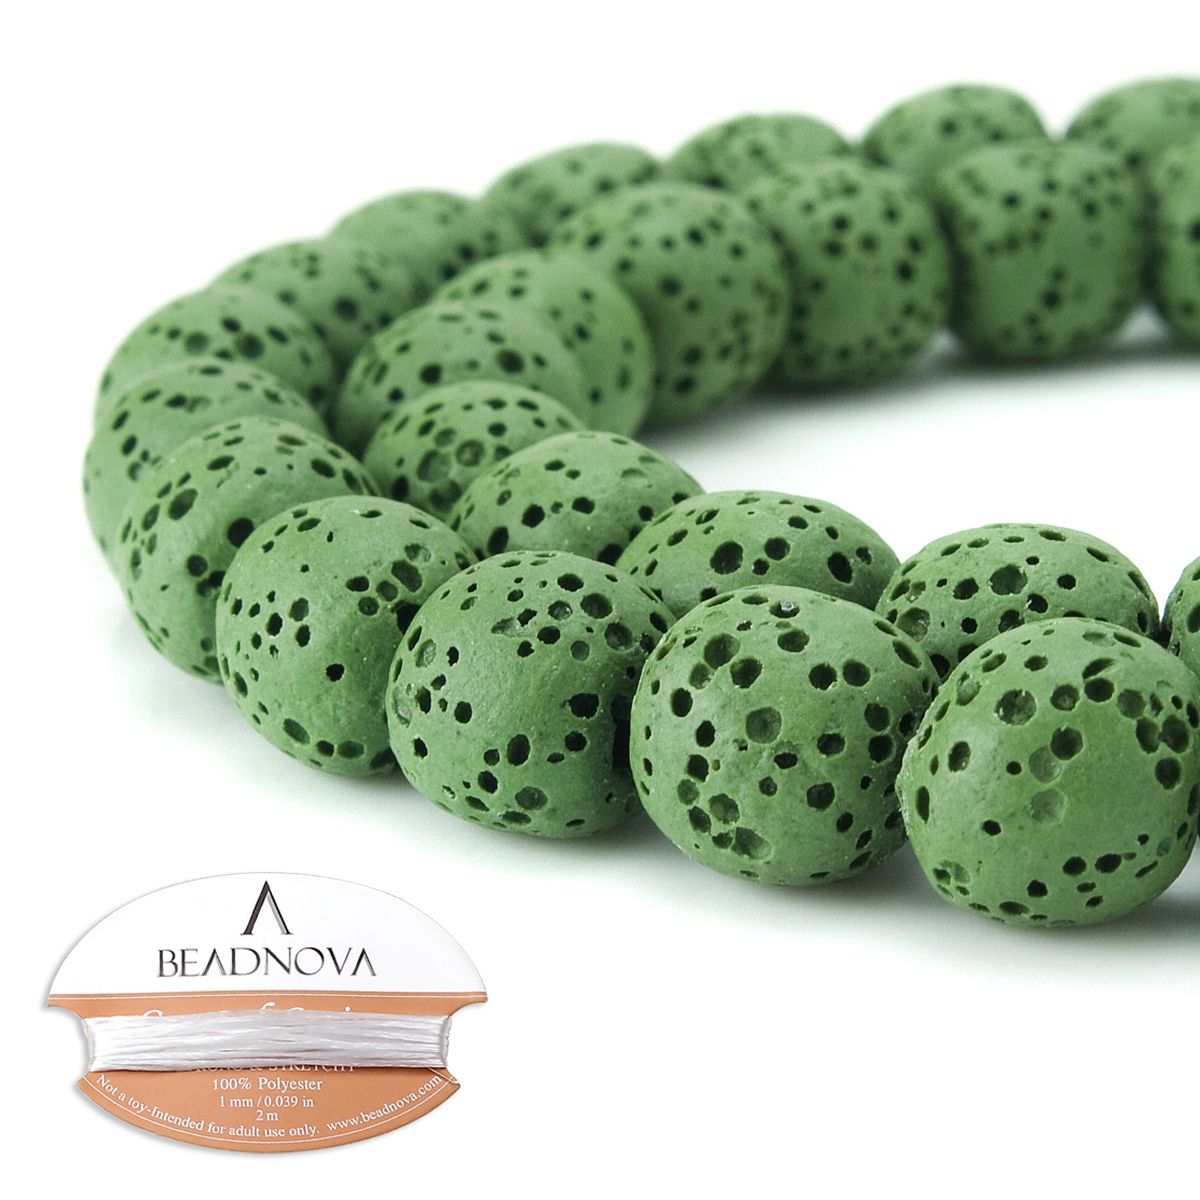  BEADNOVA 10mm Color Lava Beads Natural Crystal Beads Stone  Gemstone Round Loose Energy Healing Beads for Jewelry Making (10mm,  32-34pcs, Mix Color)